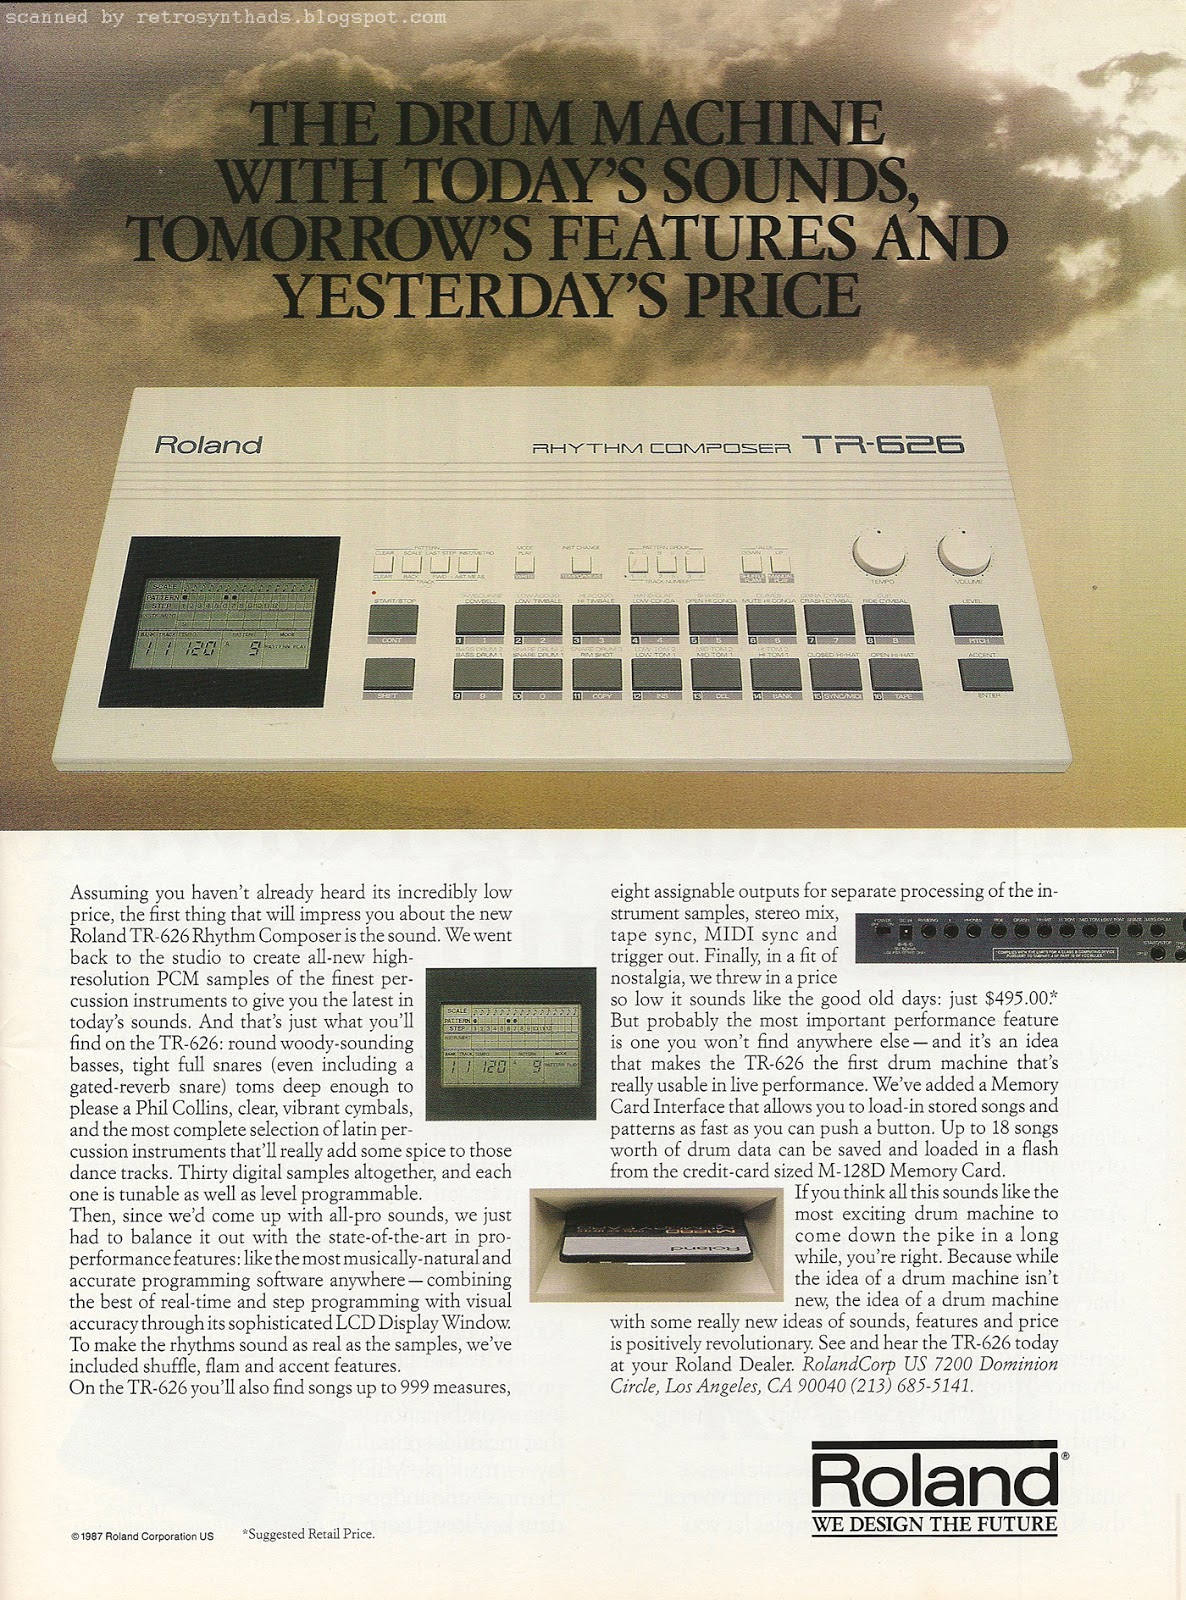 Retro Synth Ads: Roland TR-626 "The drum machine with today's sounds, tomorrow's features and